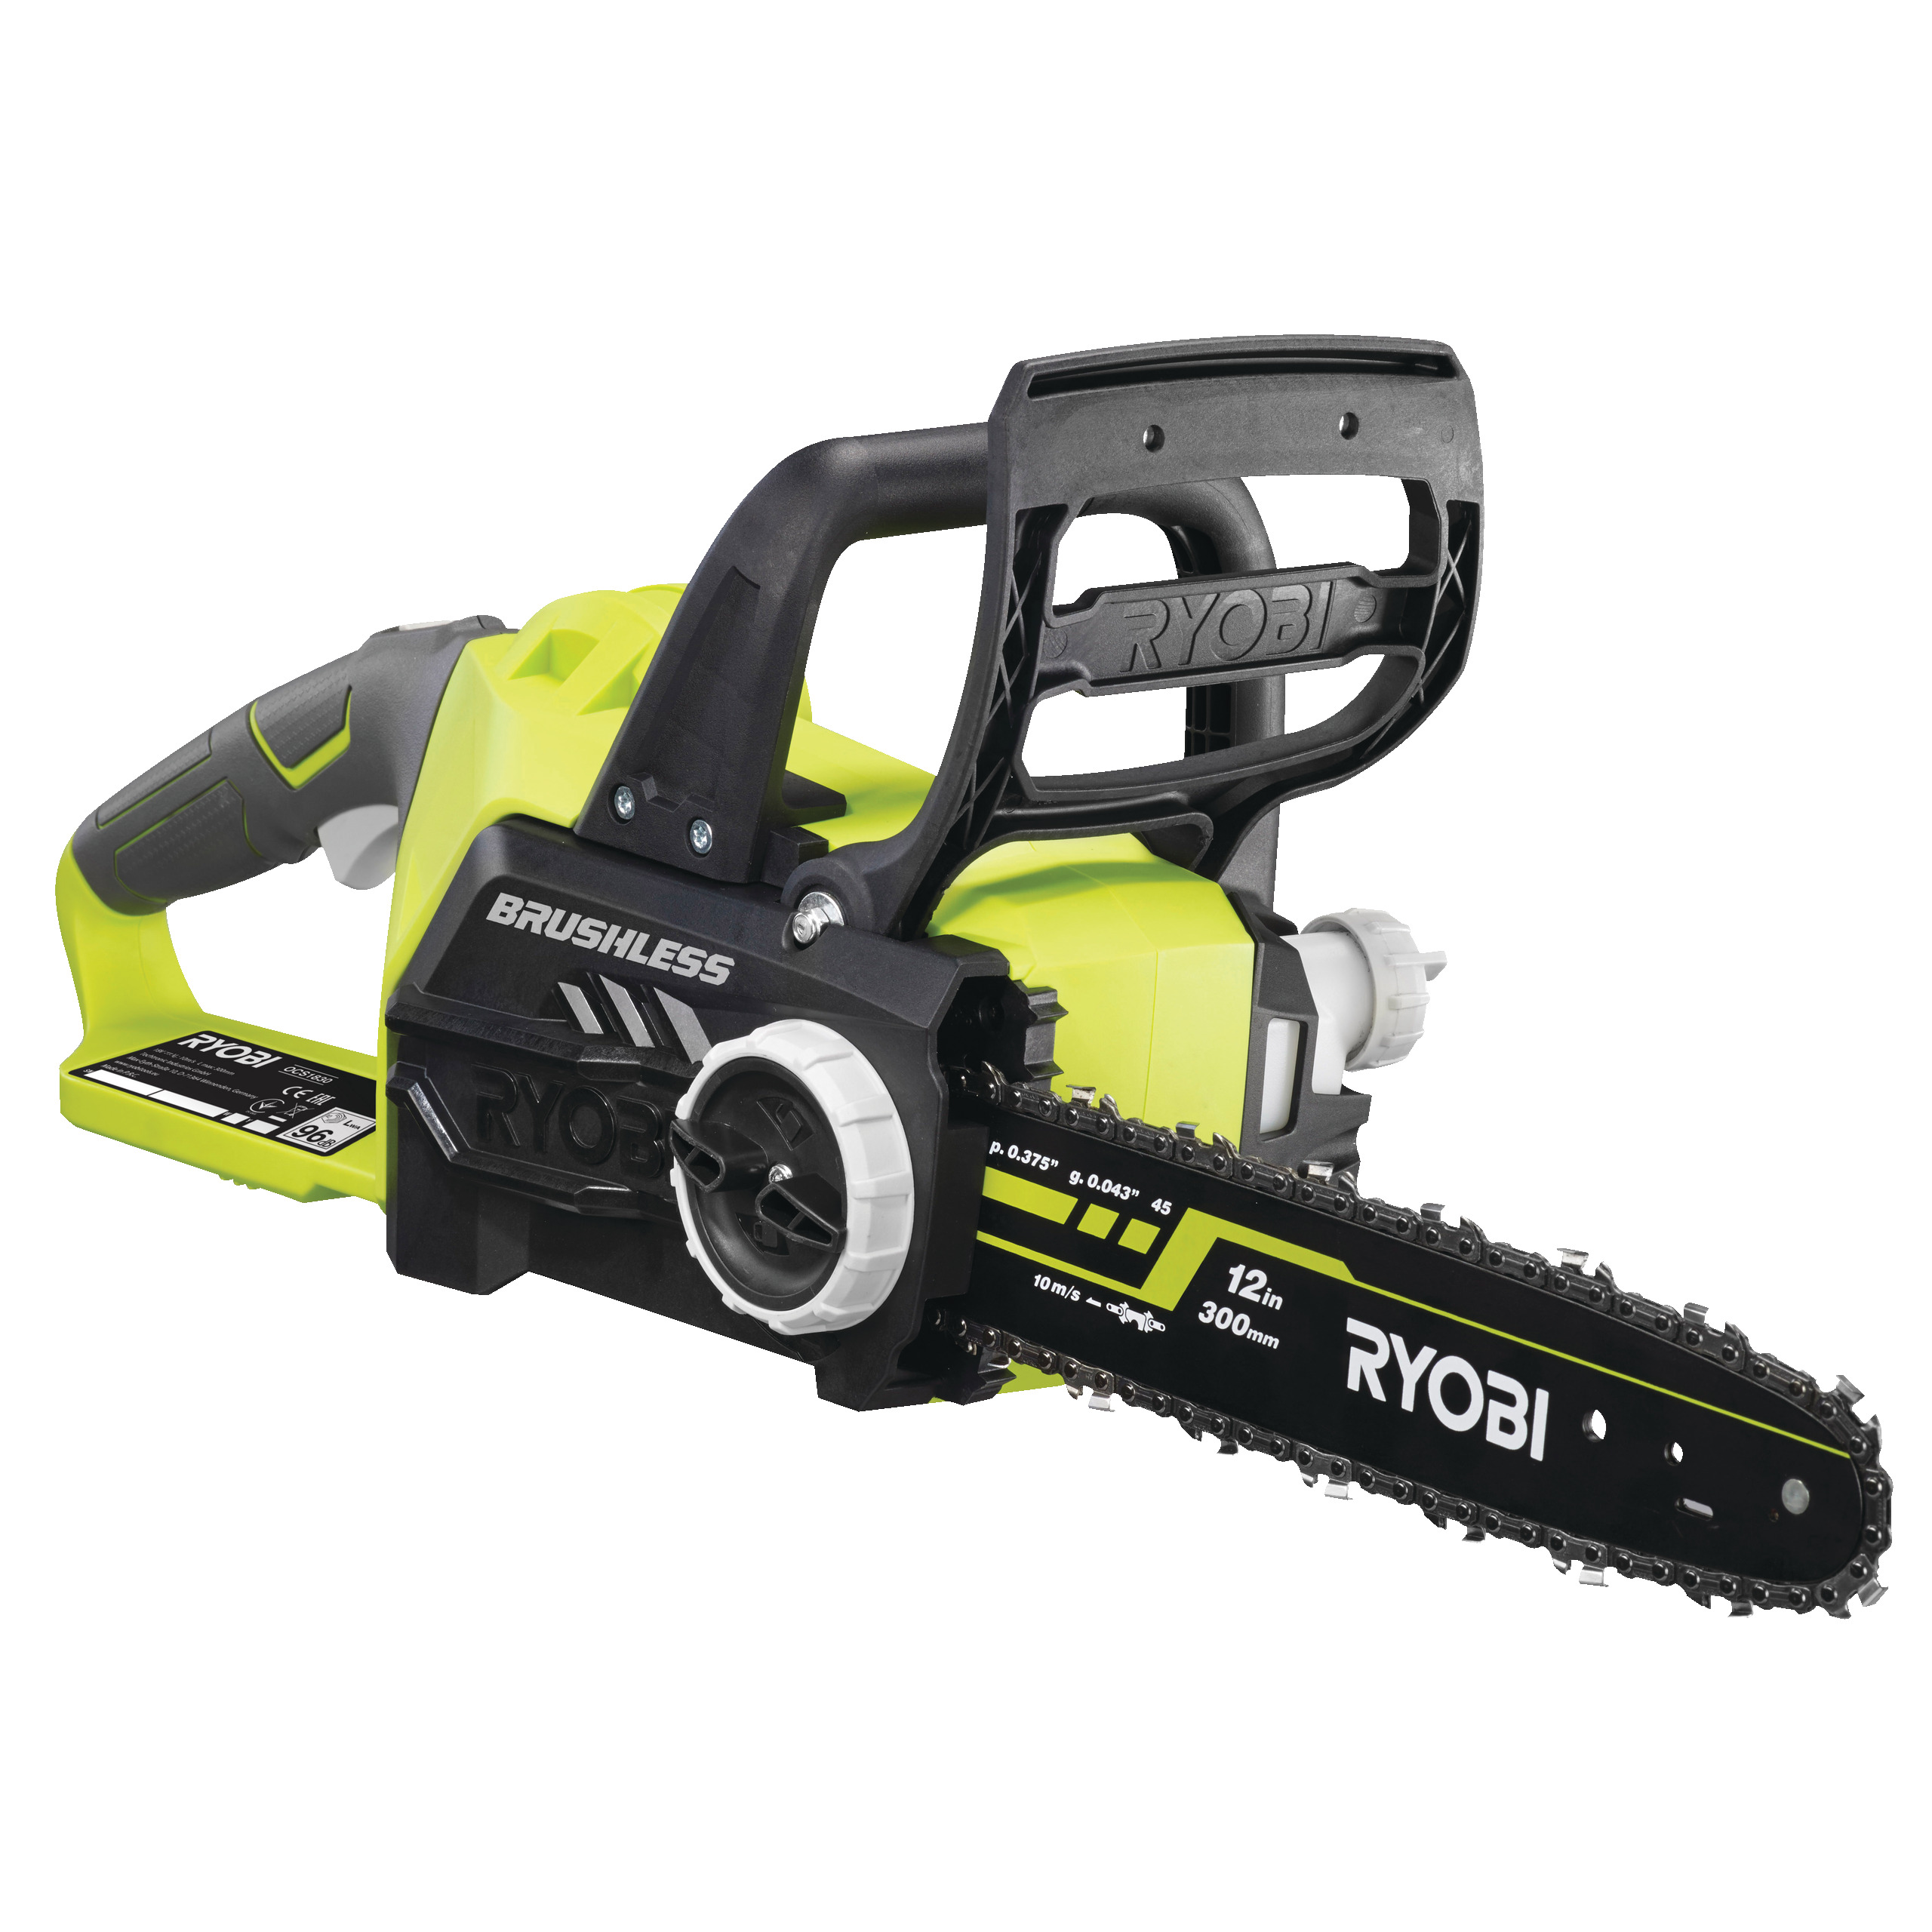 ONE+ 18V Brushless Accu 30cm Kettingzaag (excl. accu)_snippet_video_1